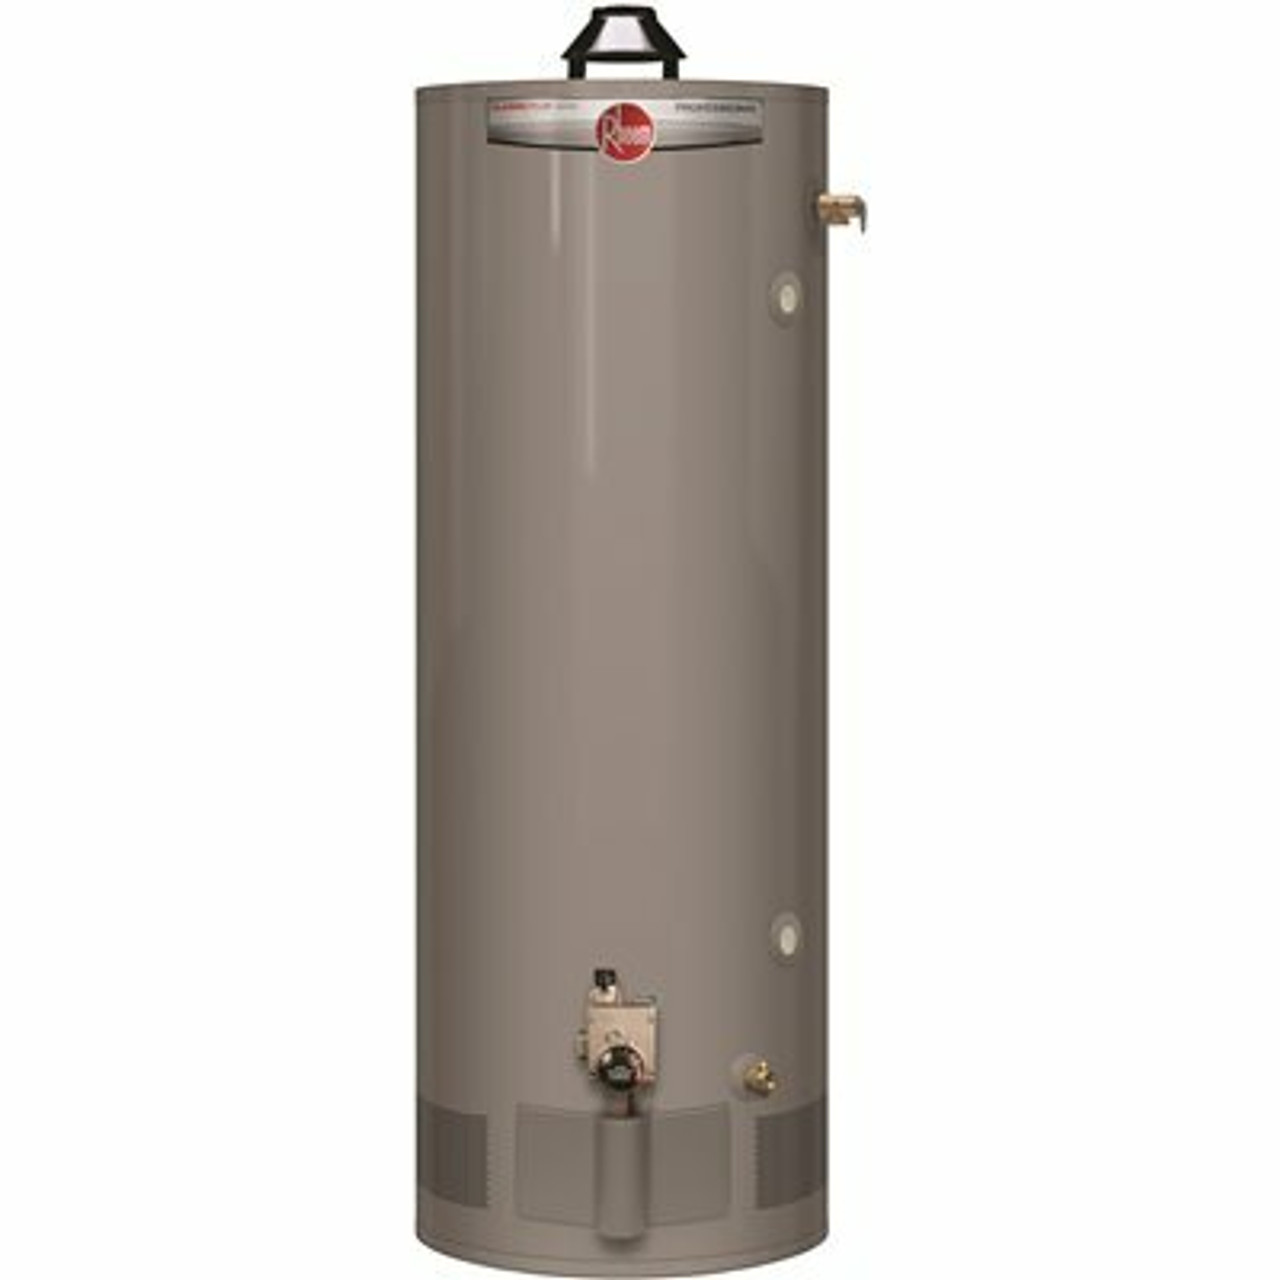 Rheem Pro-Classic Plus 40 Gal. Short 8-Year Warranty Residential Natural Gas Water Heater